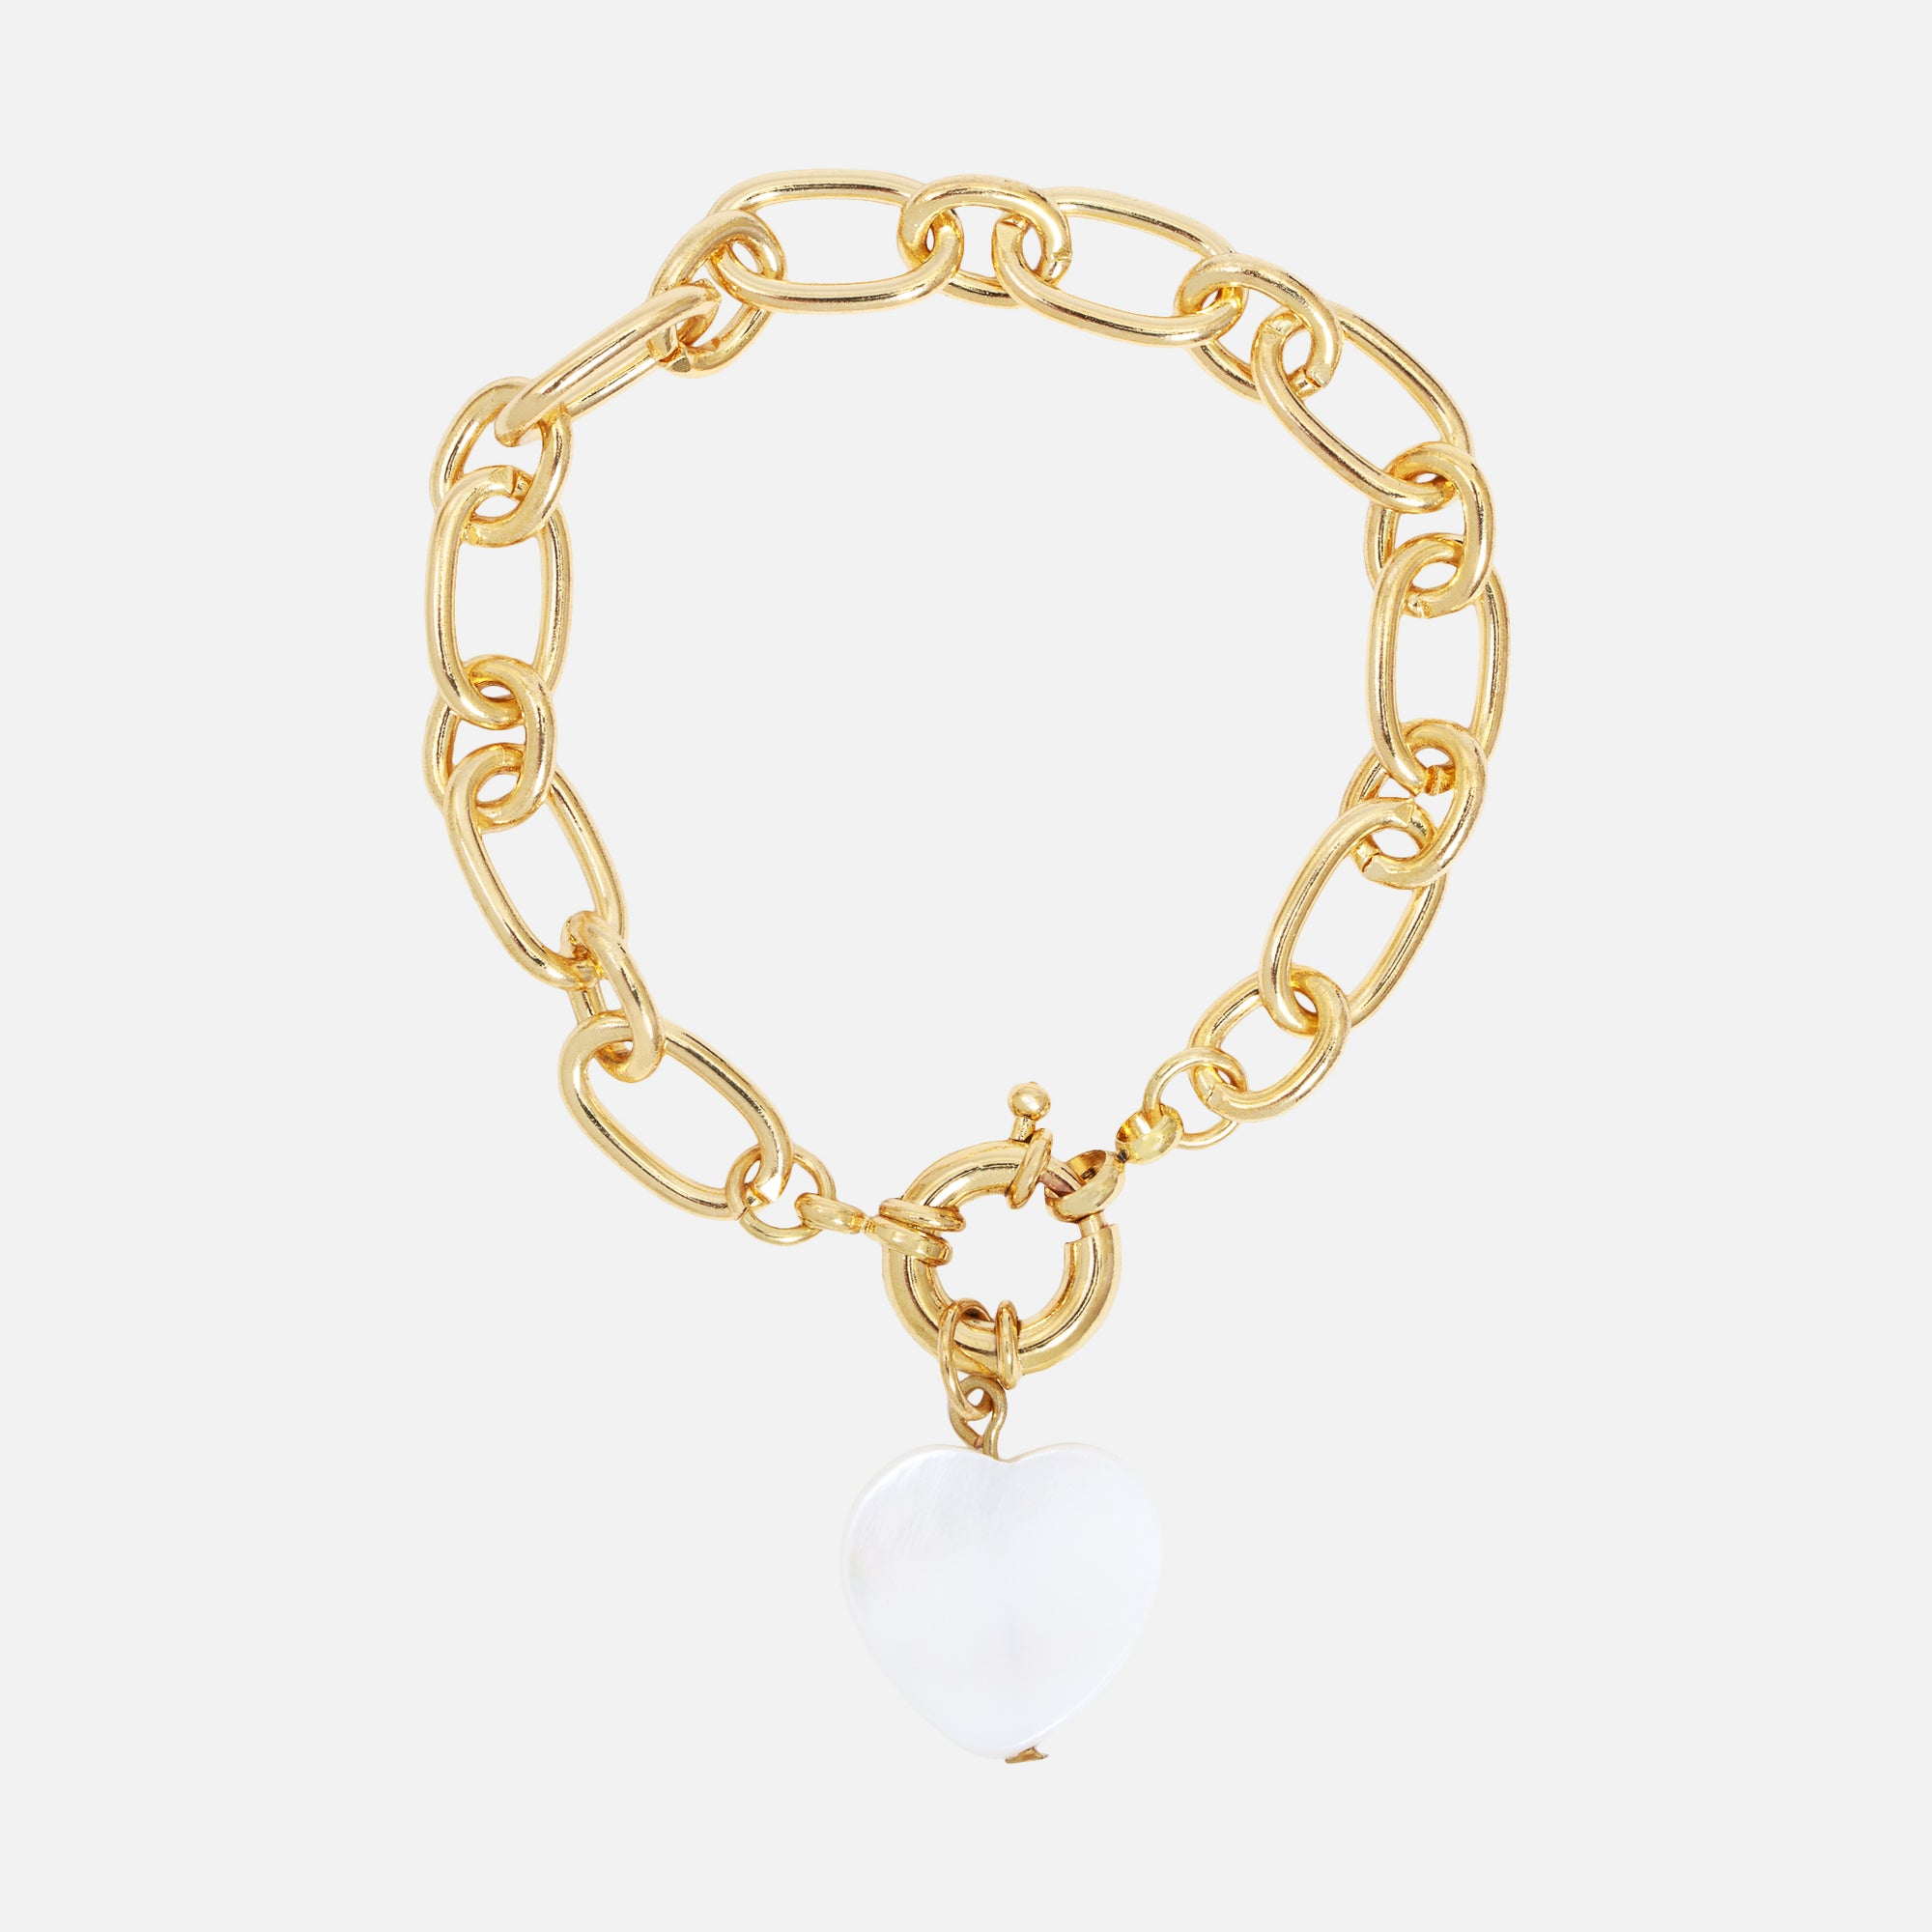 Gold bracelet with white heart charm